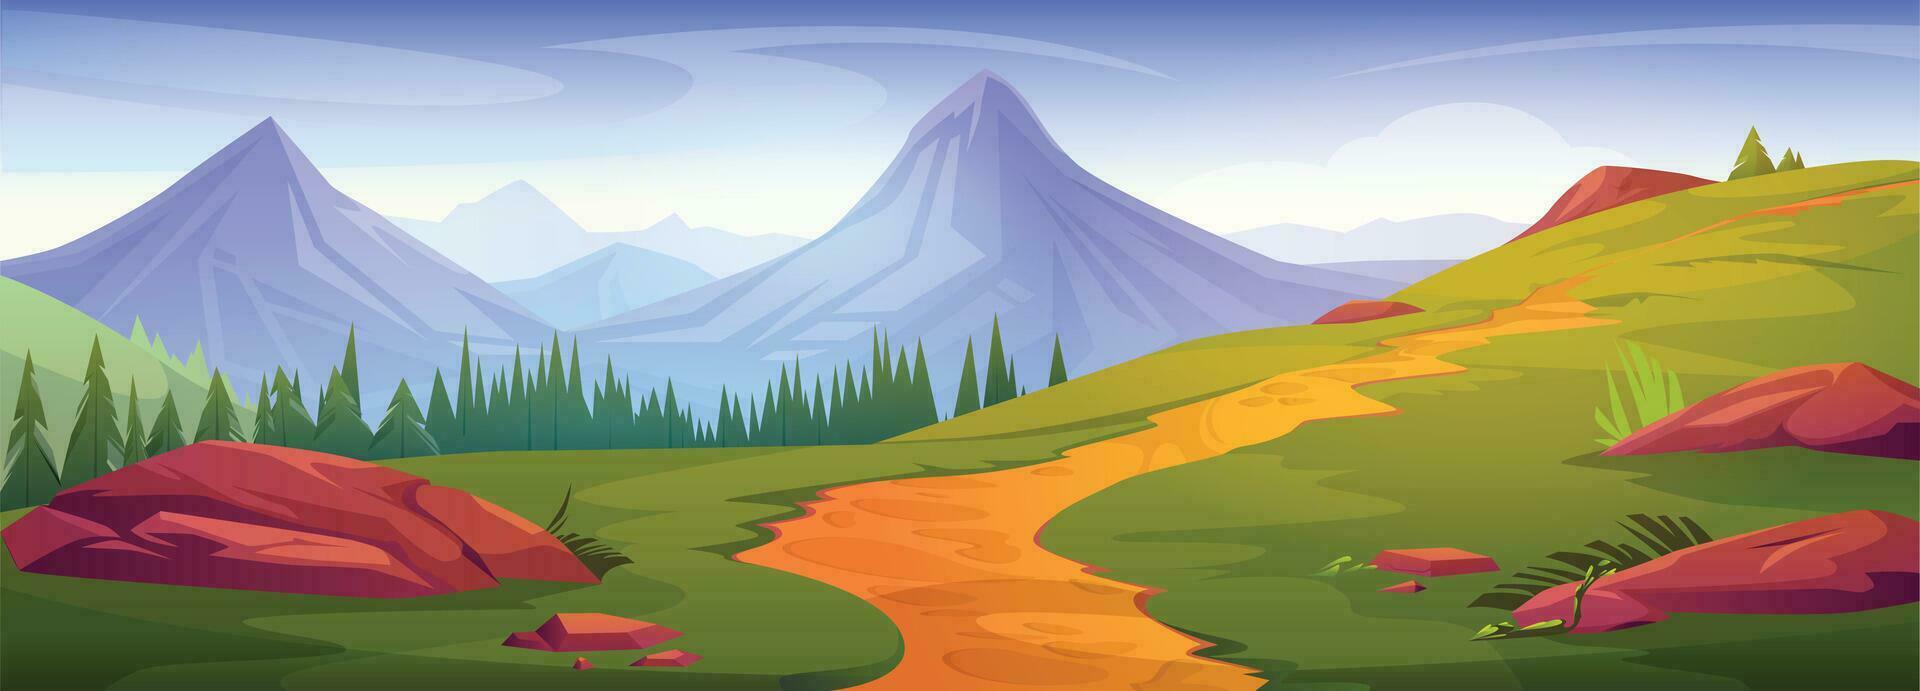 Cartoon mountain landscape with foothpath vector